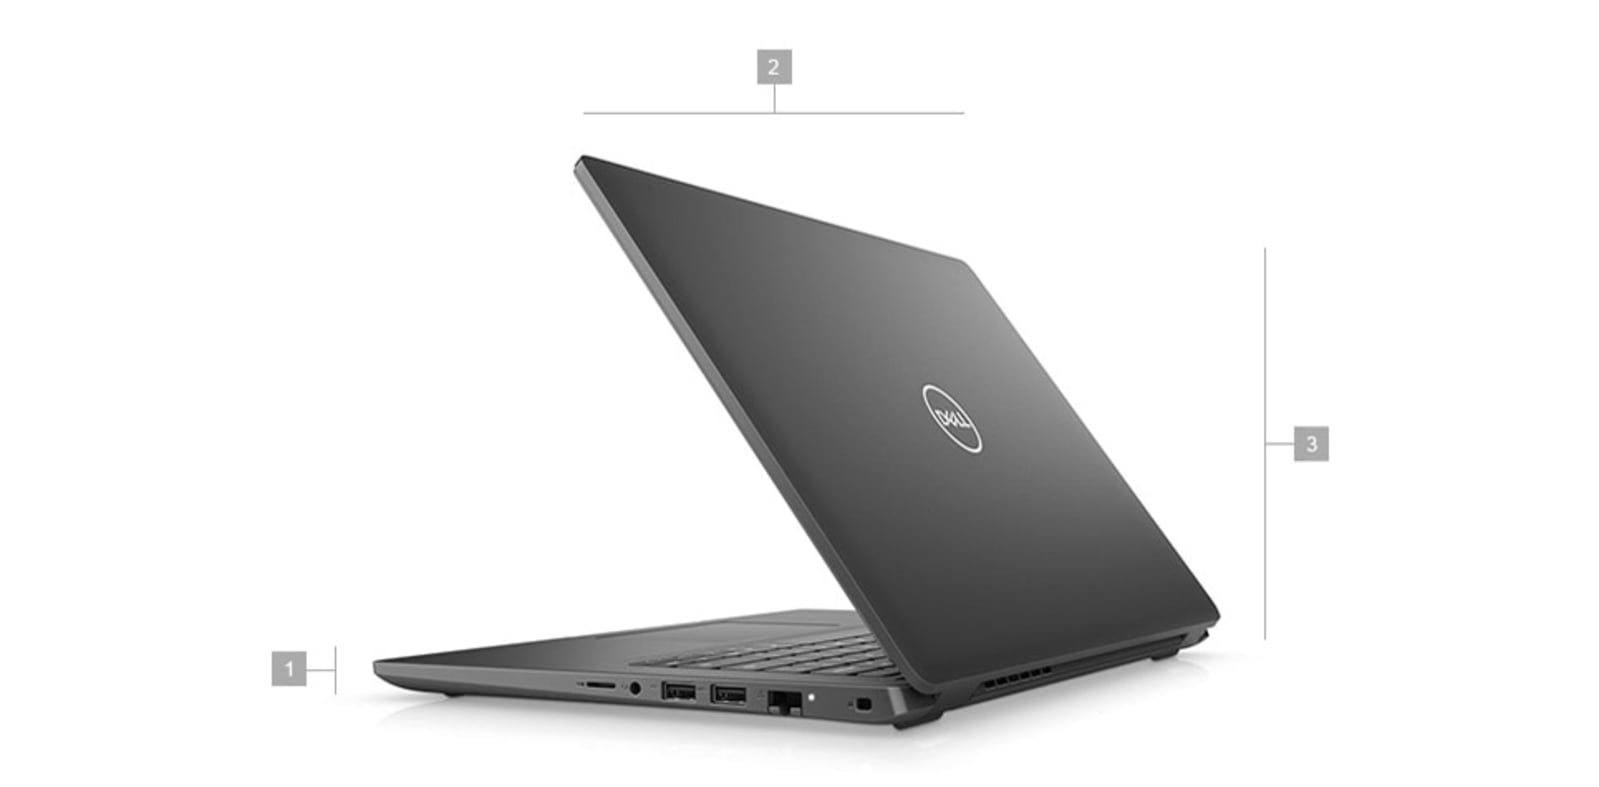 Restored Dell Latitude 3000 3410 Laptop (2020) | 14" FHD | Core i5 - 256GB SSD - 8GB RAM | 4 Cores @ 4.2 GHz - 10th Gen CPU (Refurbished) - image 2 of 11